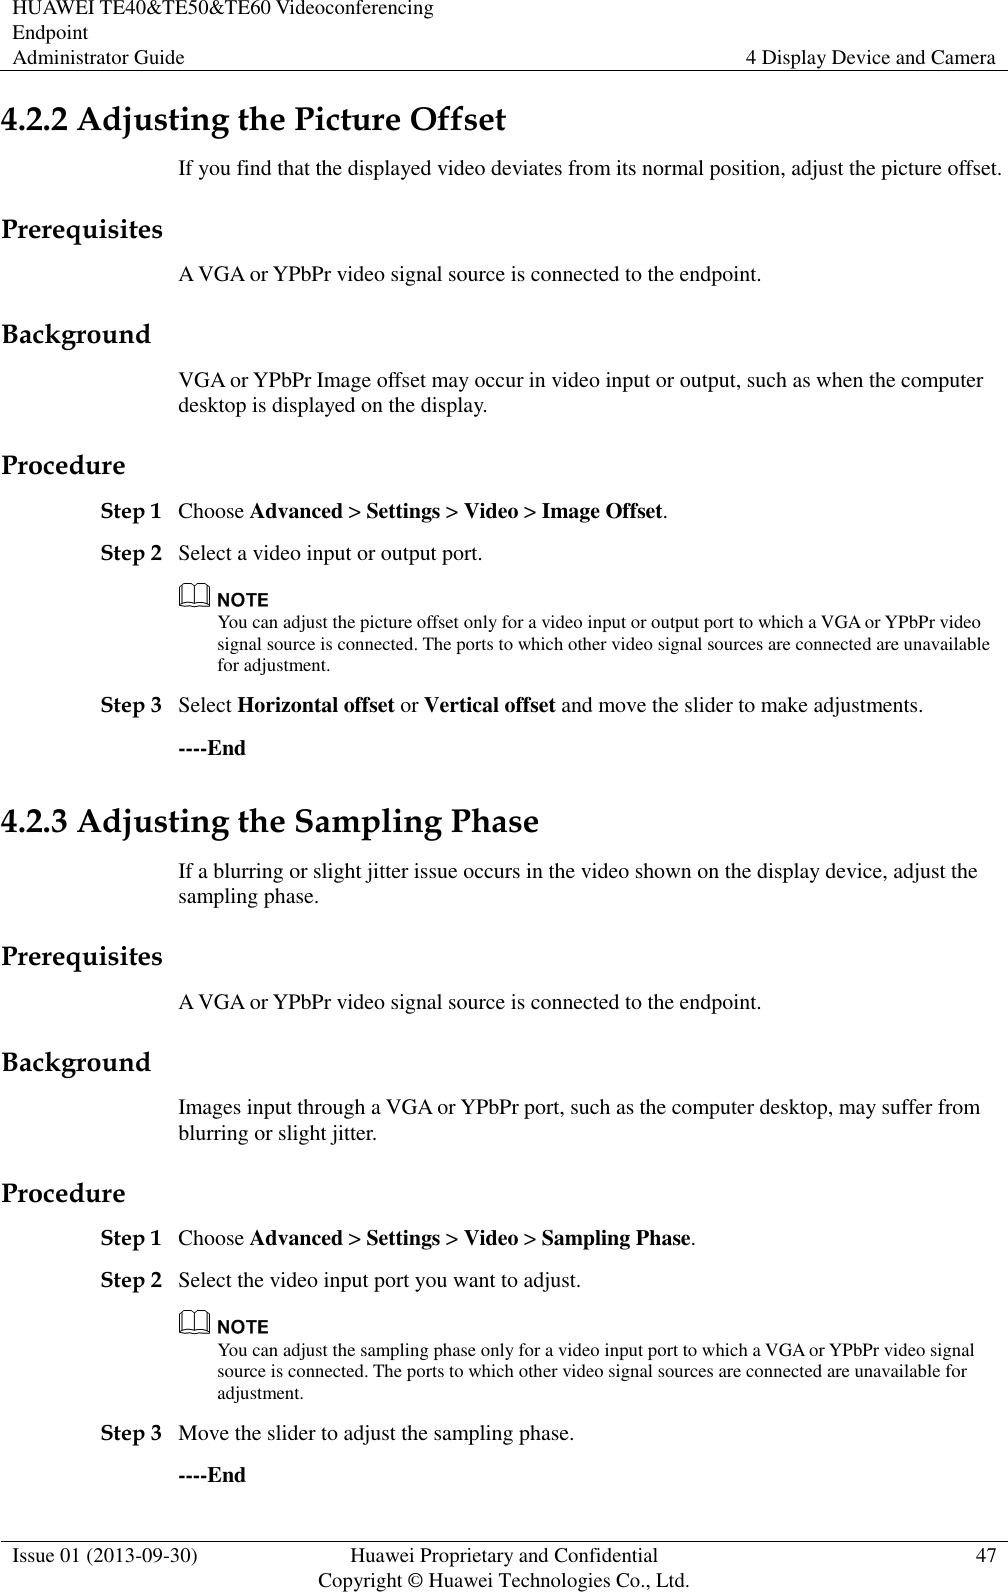 HUAWEI TE40&amp;TE50&amp;TE60 Videoconferencing Endpoint Administrator Guide 4 Display Device and Camera  Issue 01 (2013-09-30) Huawei Proprietary and Confidential                                     Copyright © Huawei Technologies Co., Ltd. 47  4.2.2 Adjusting the Picture Offset If you find that the displayed video deviates from its normal position, adjust the picture offset. Prerequisites A VGA or YPbPr video signal source is connected to the endpoint. Background VGA or YPbPr Image offset may occur in video input or output, such as when the computer desktop is displayed on the display. Procedure Step 1 Choose Advanced &gt; Settings &gt; Video &gt; Image Offset. Step 2 Select a video input or output port.  You can adjust the picture offset only for a video input or output port to which a VGA or YPbPr video signal source is connected. The ports to which other video signal sources are connected are unavailable for adjustment.   Step 3 Select Horizontal offset or Vertical offset and move the slider to make adjustments. ----End 4.2.3 Adjusting the Sampling Phase If a blurring or slight jitter issue occurs in the video shown on the display device, adjust the sampling phase. Prerequisites A VGA or YPbPr video signal source is connected to the endpoint. Background Images input through a VGA or YPbPr port, such as the computer desktop, may suffer from blurring or slight jitter.   Procedure Step 1 Choose Advanced &gt; Settings &gt; Video &gt; Sampling Phase. Step 2 Select the video input port you want to adjust.  You can adjust the sampling phase only for a video input port to which a VGA or YPbPr video signal source is connected. The ports to which other video signal sources are connected are unavailable for adjustment. Step 3 Move the slider to adjust the sampling phase. ----End 